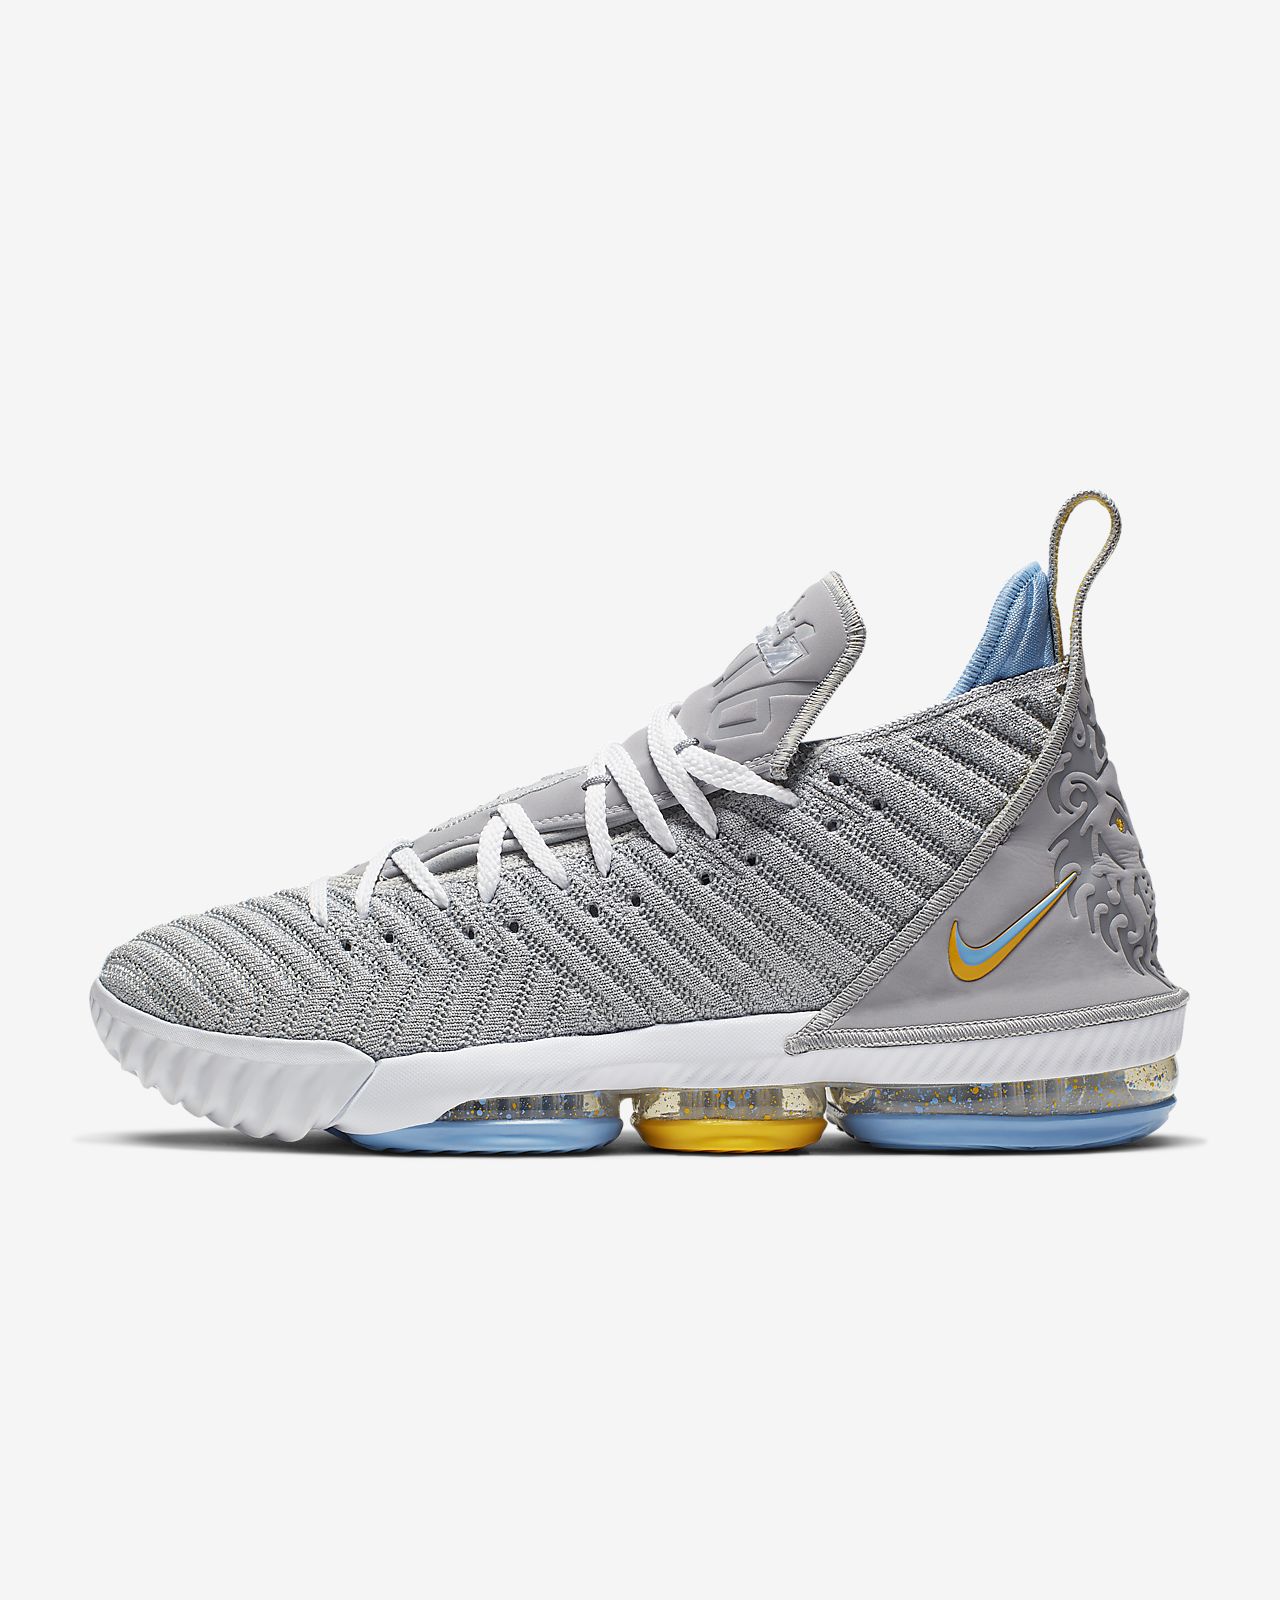 lebron 16 italia buy clothes shoes online